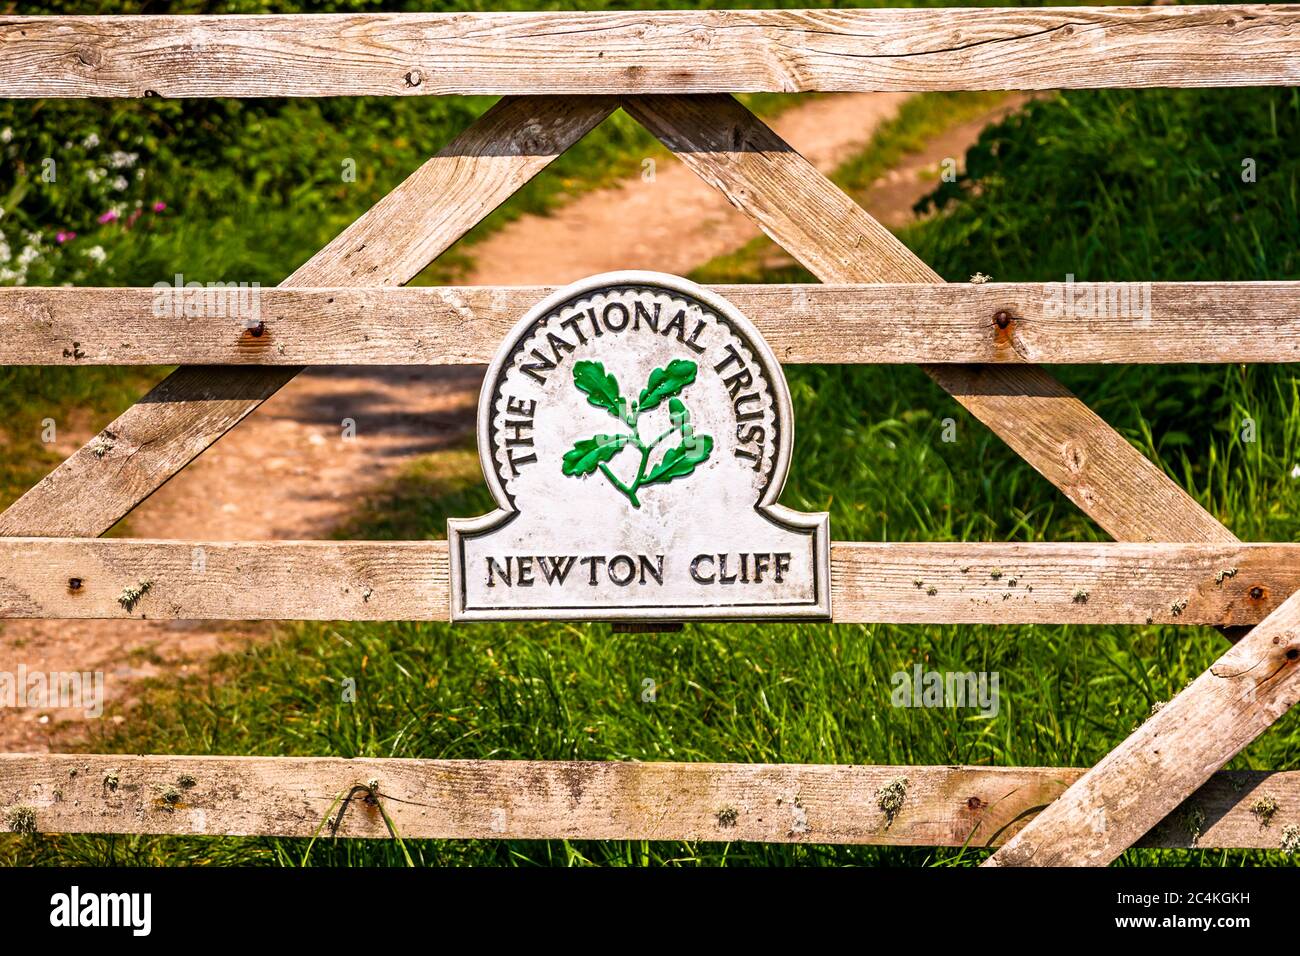 Newton Cliff, The National Trust, Lower Castle Road, St. Mawes, Inghilterra Foto Stock